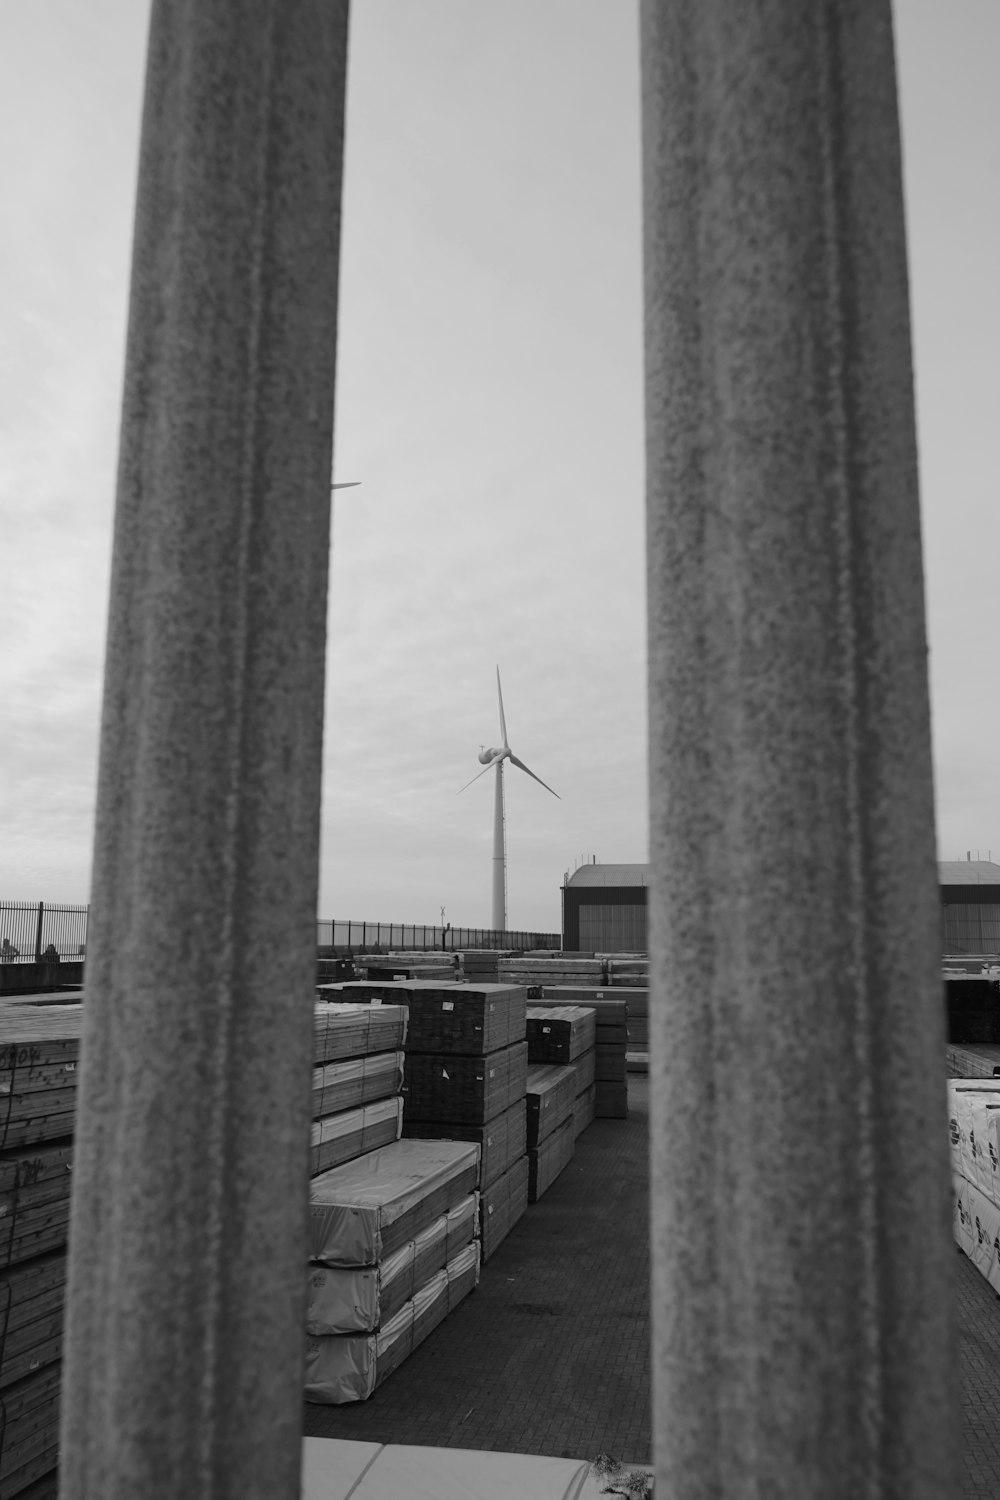 a black and white photo of a wind turbine in the distance